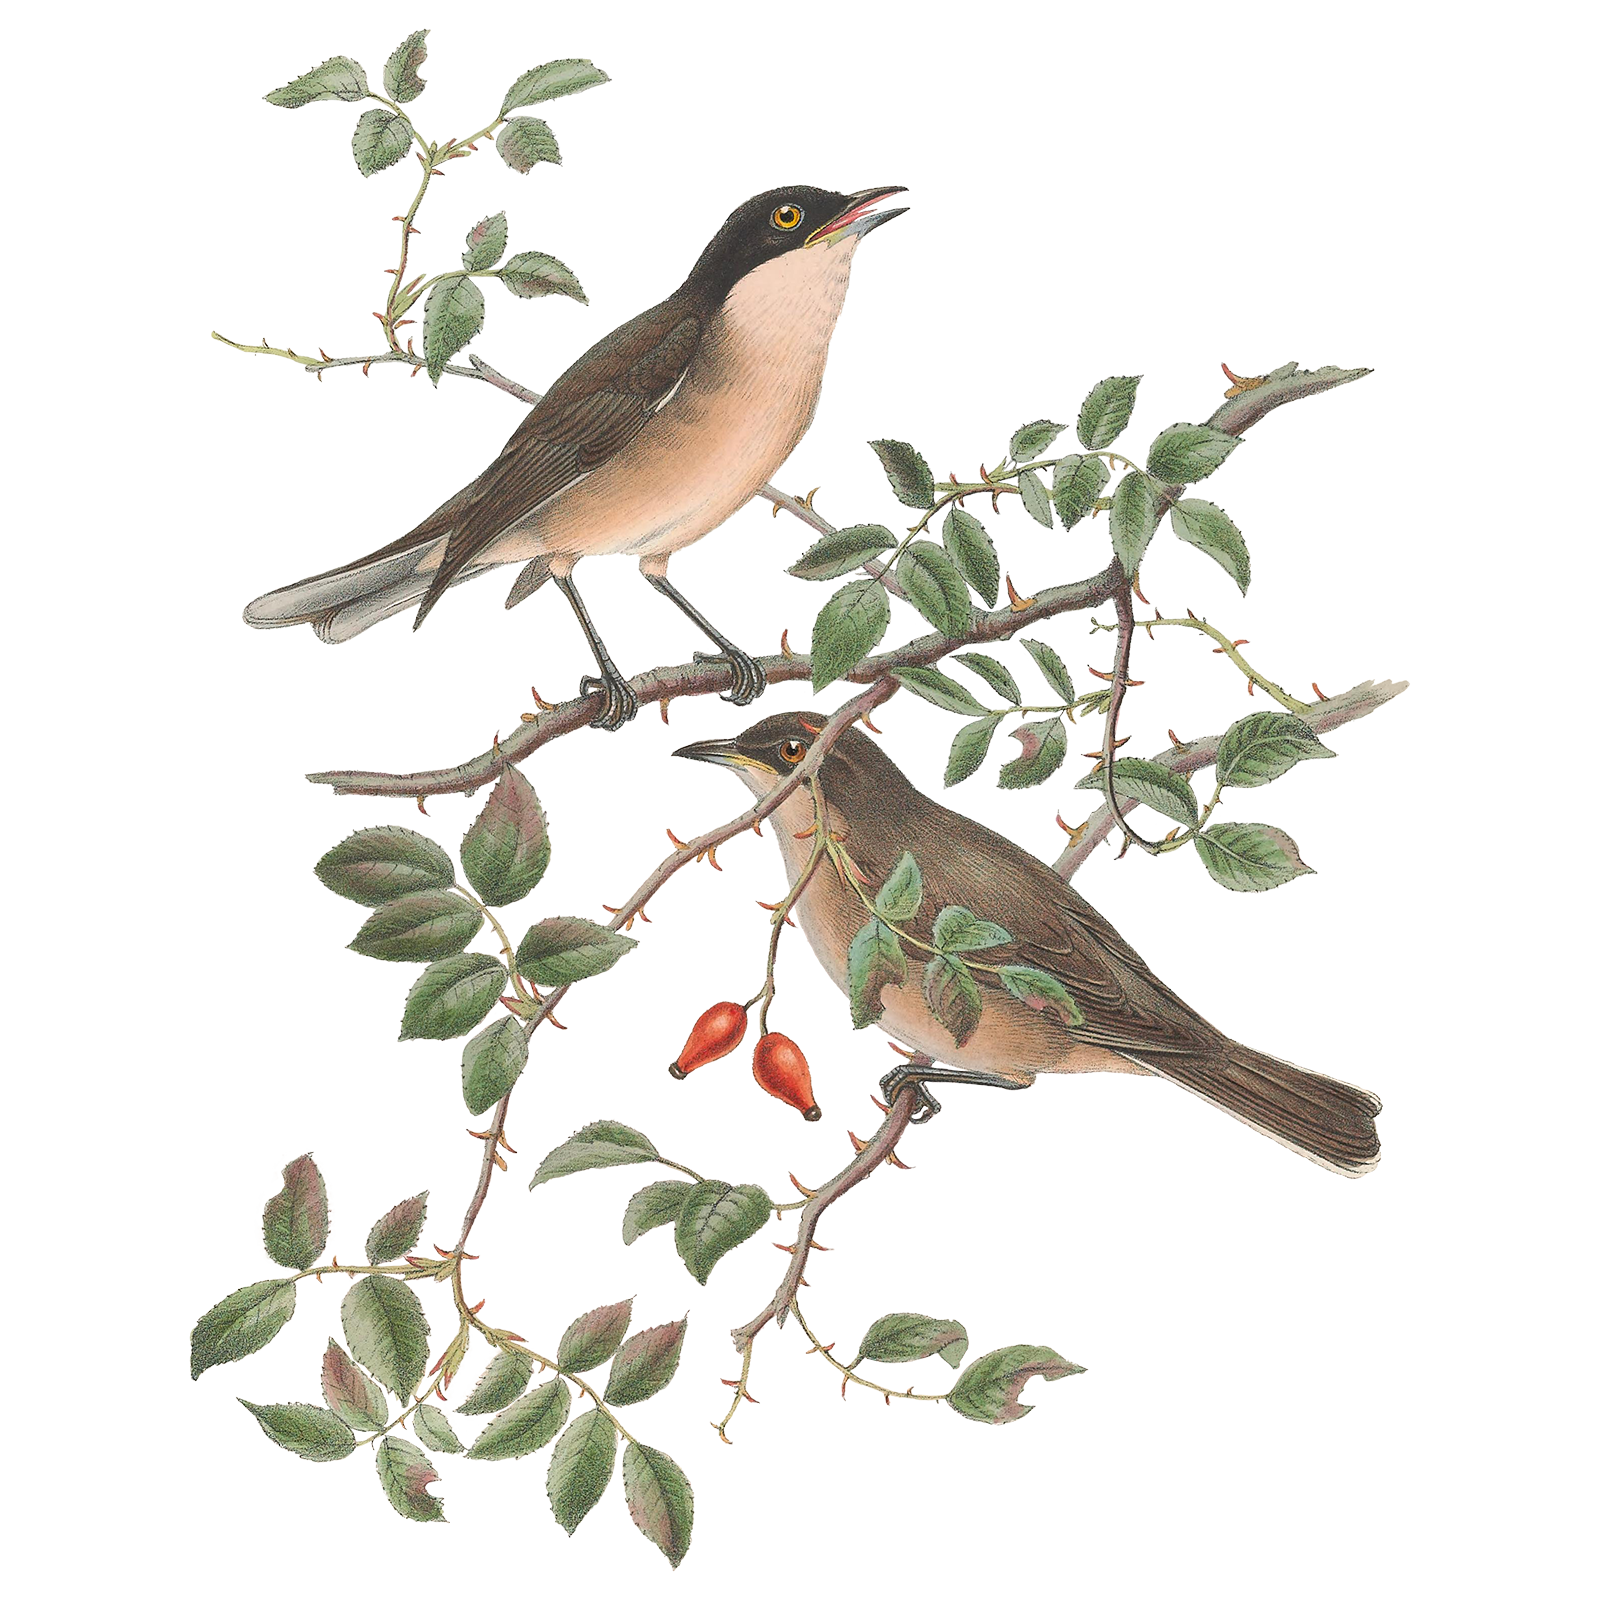 Illustration of two warblers in thorny branches.